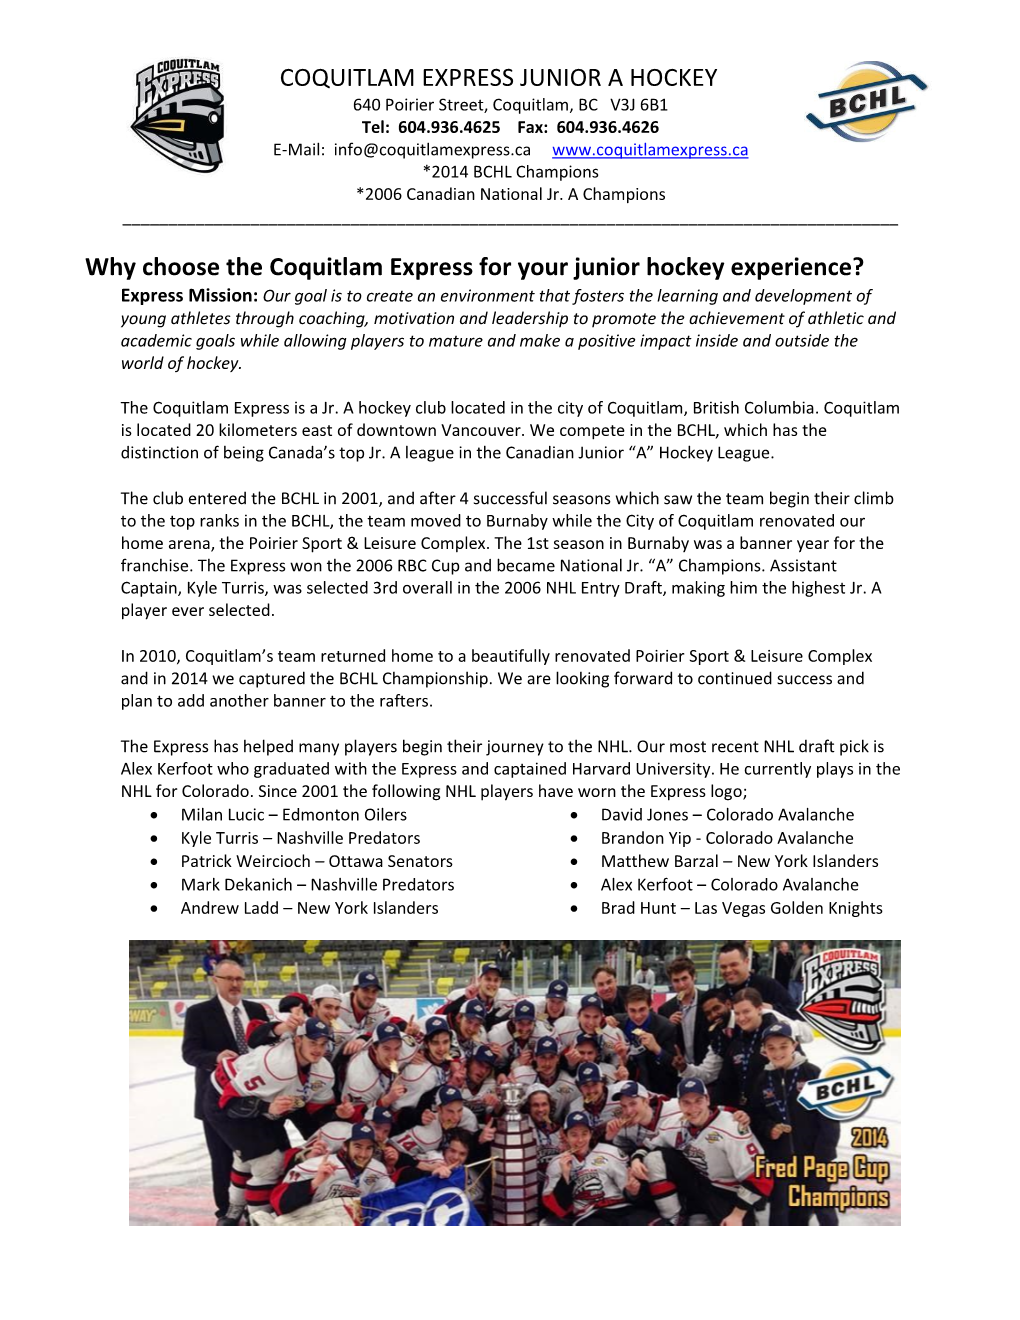 Why Choose the Coquitlam Express for Your Junior Hockey Experience?